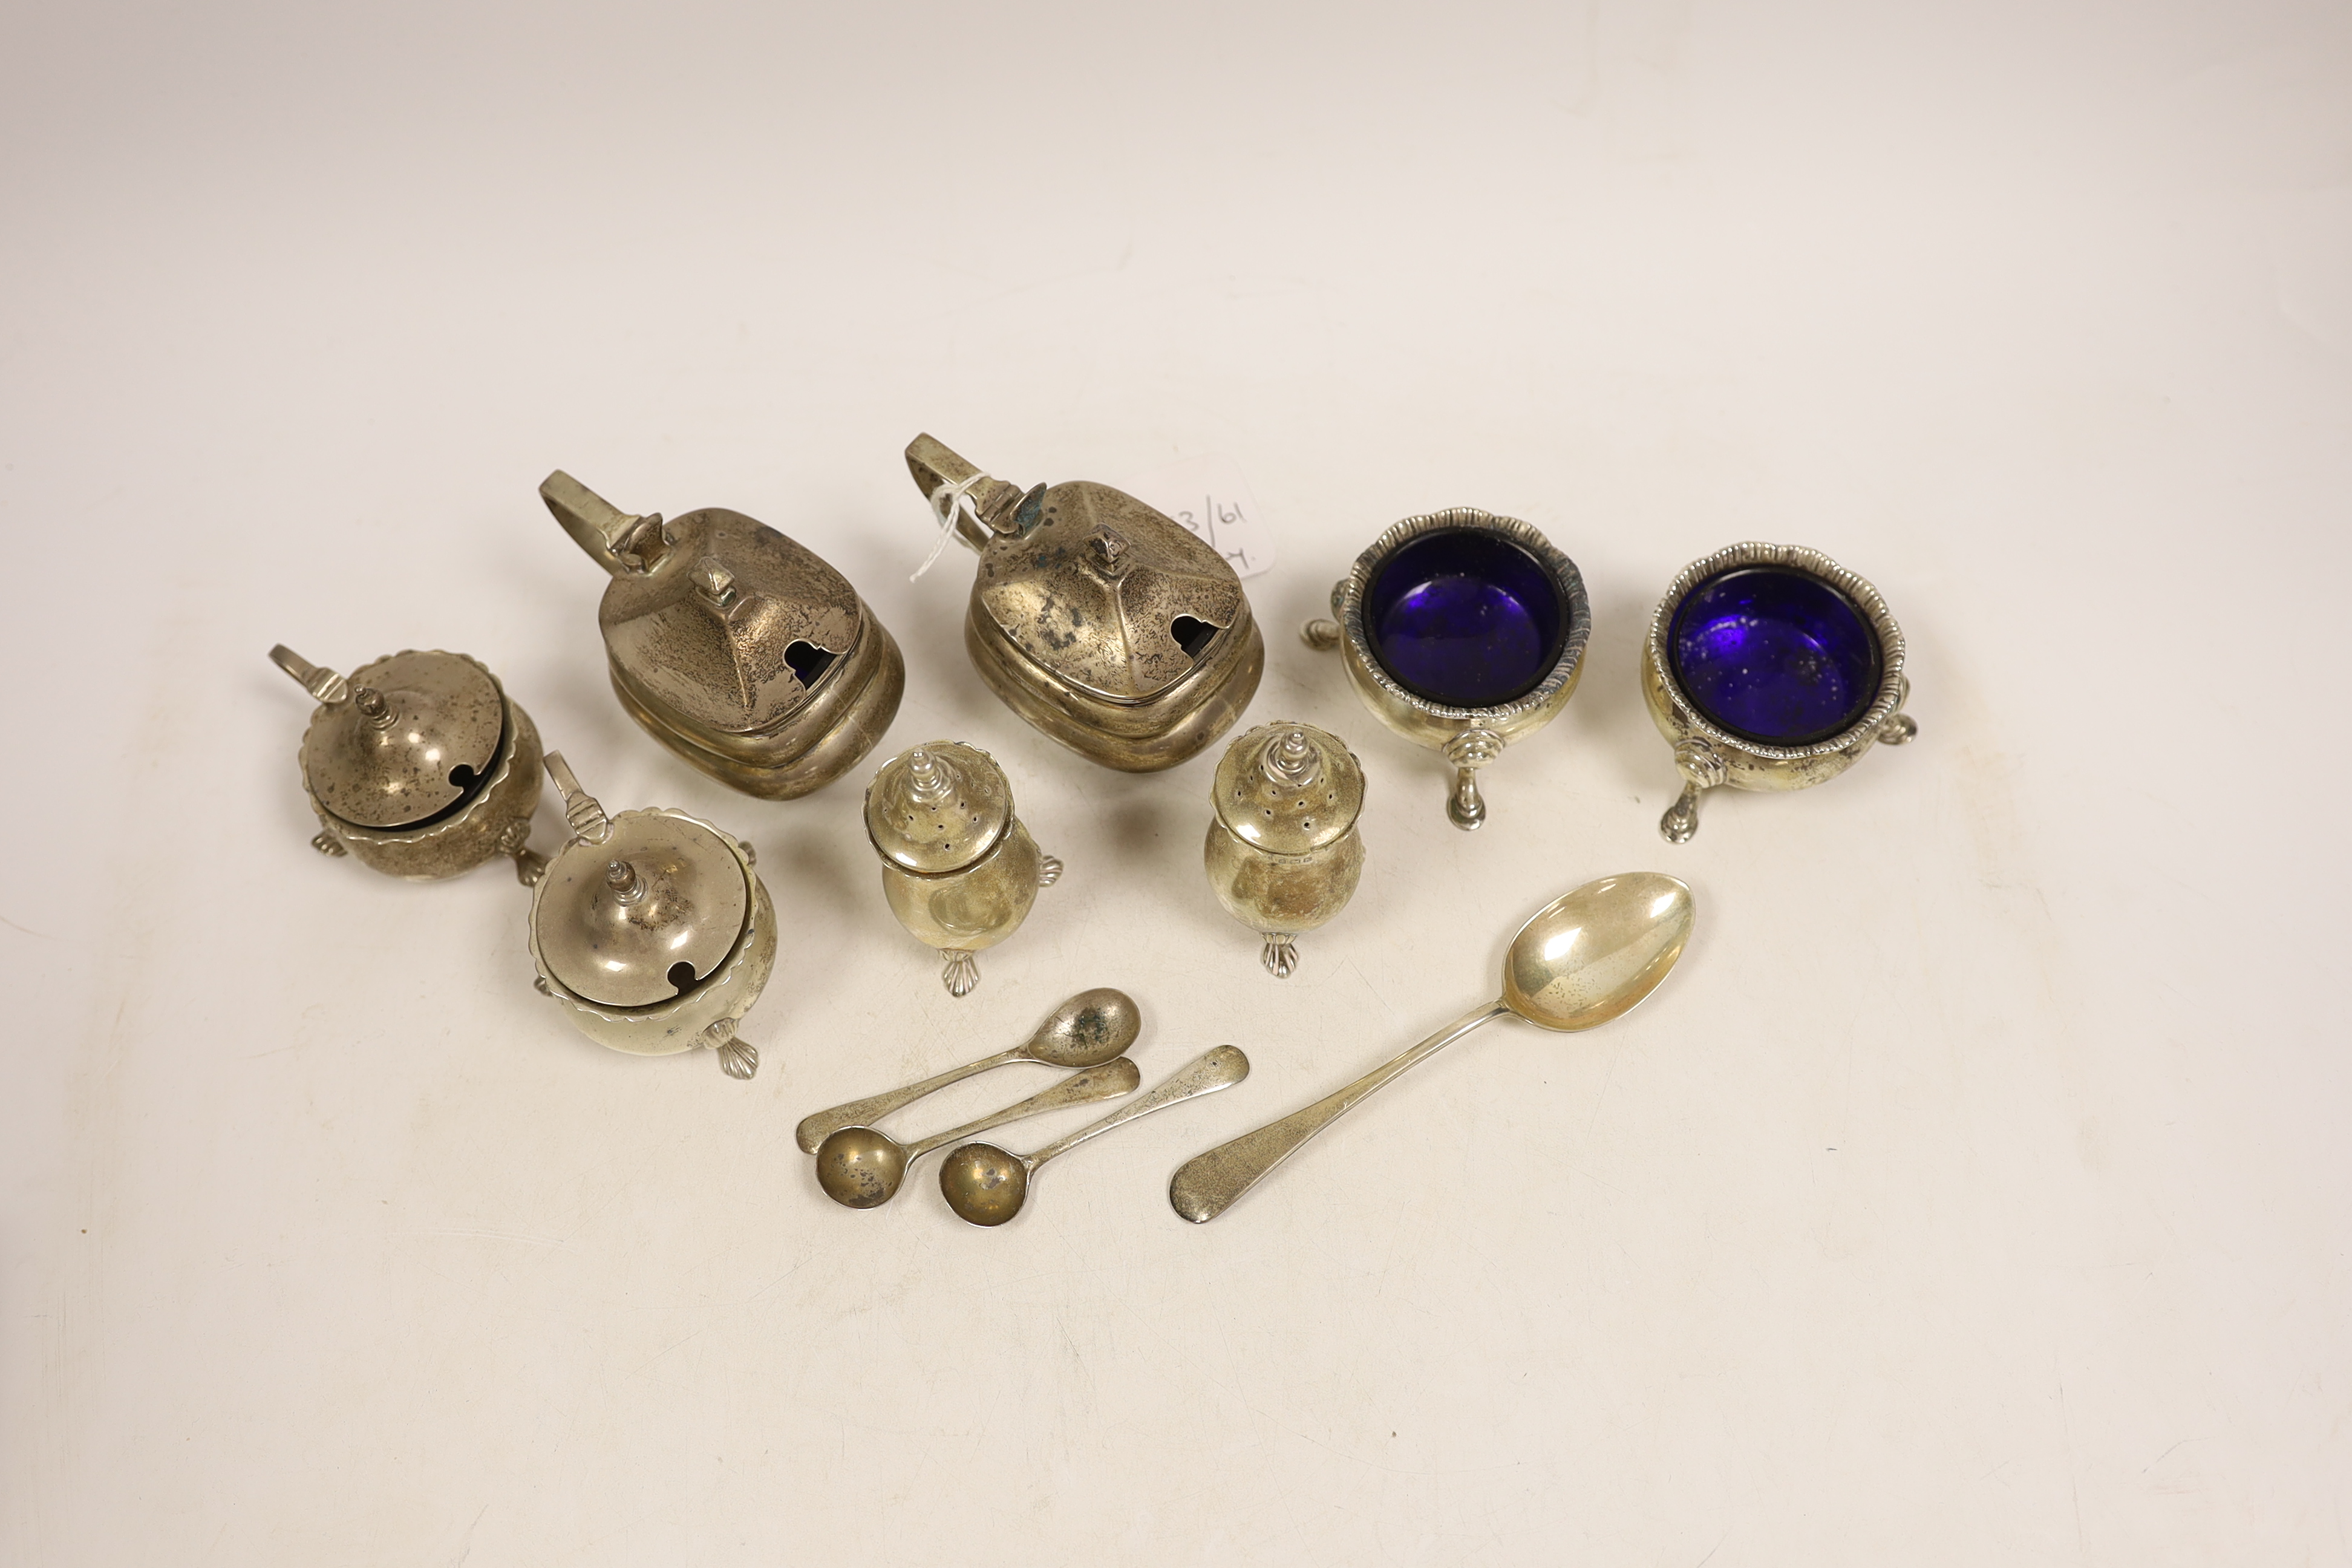 A pair of George V oblong silver lidded mustards with blue glass liners, two other mustards, a pair of peppers, a pair of 'cauldron' salts, three condiment spoons and a teaspoon.